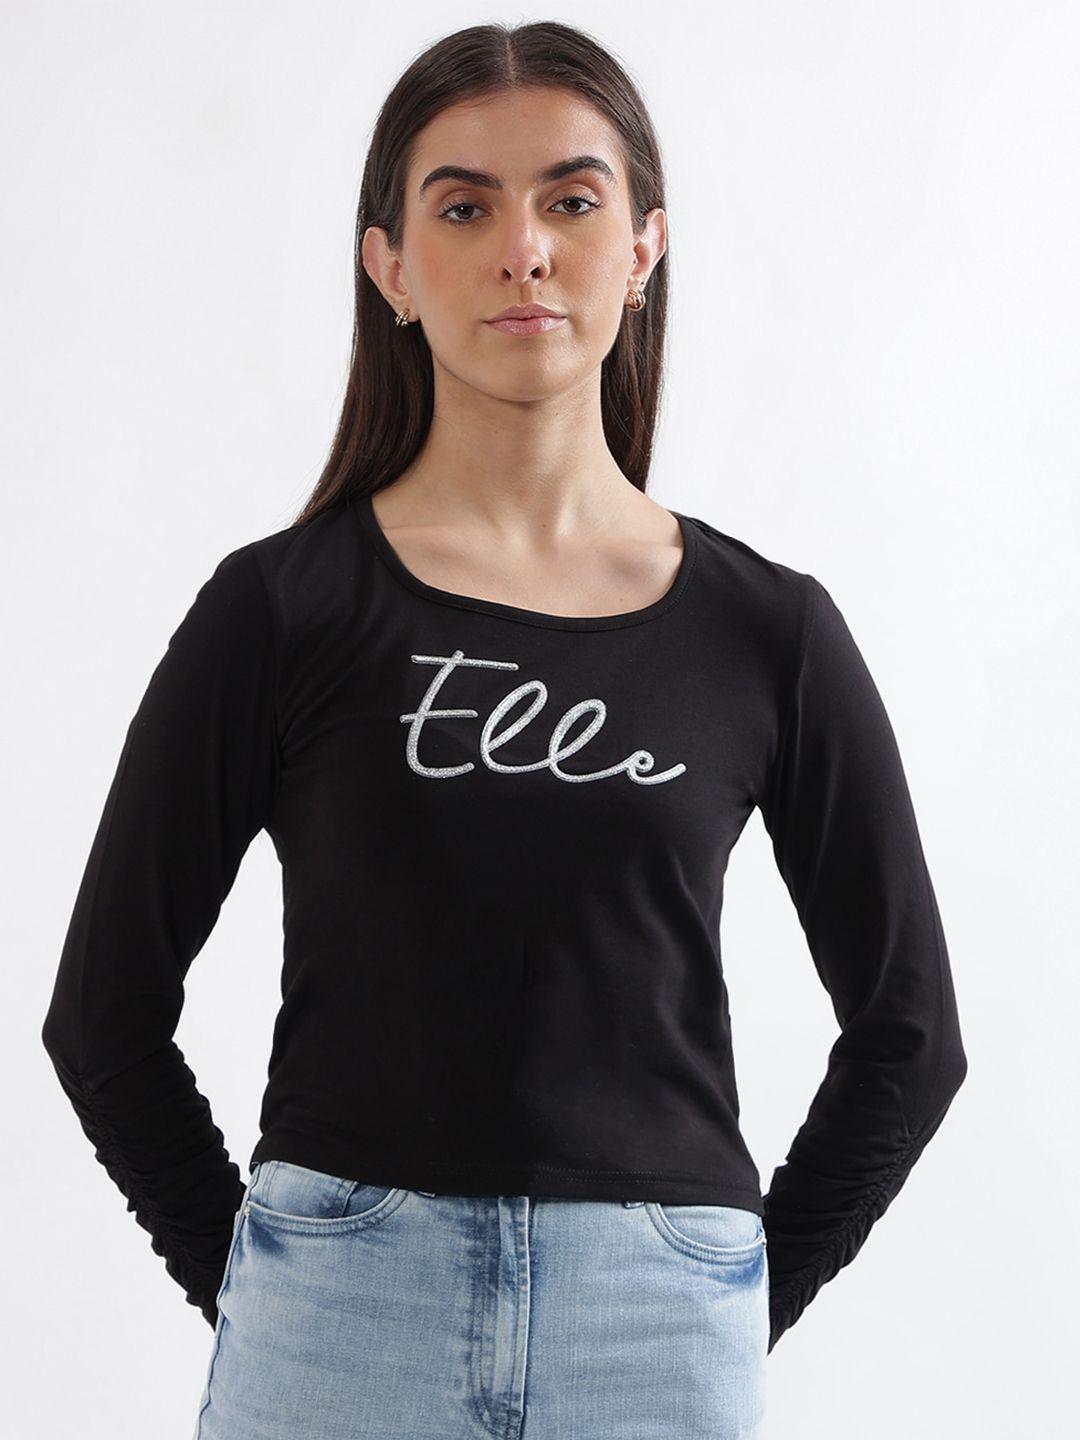 elle-typography-printed-round-neck-fitted-pure-cotton-top